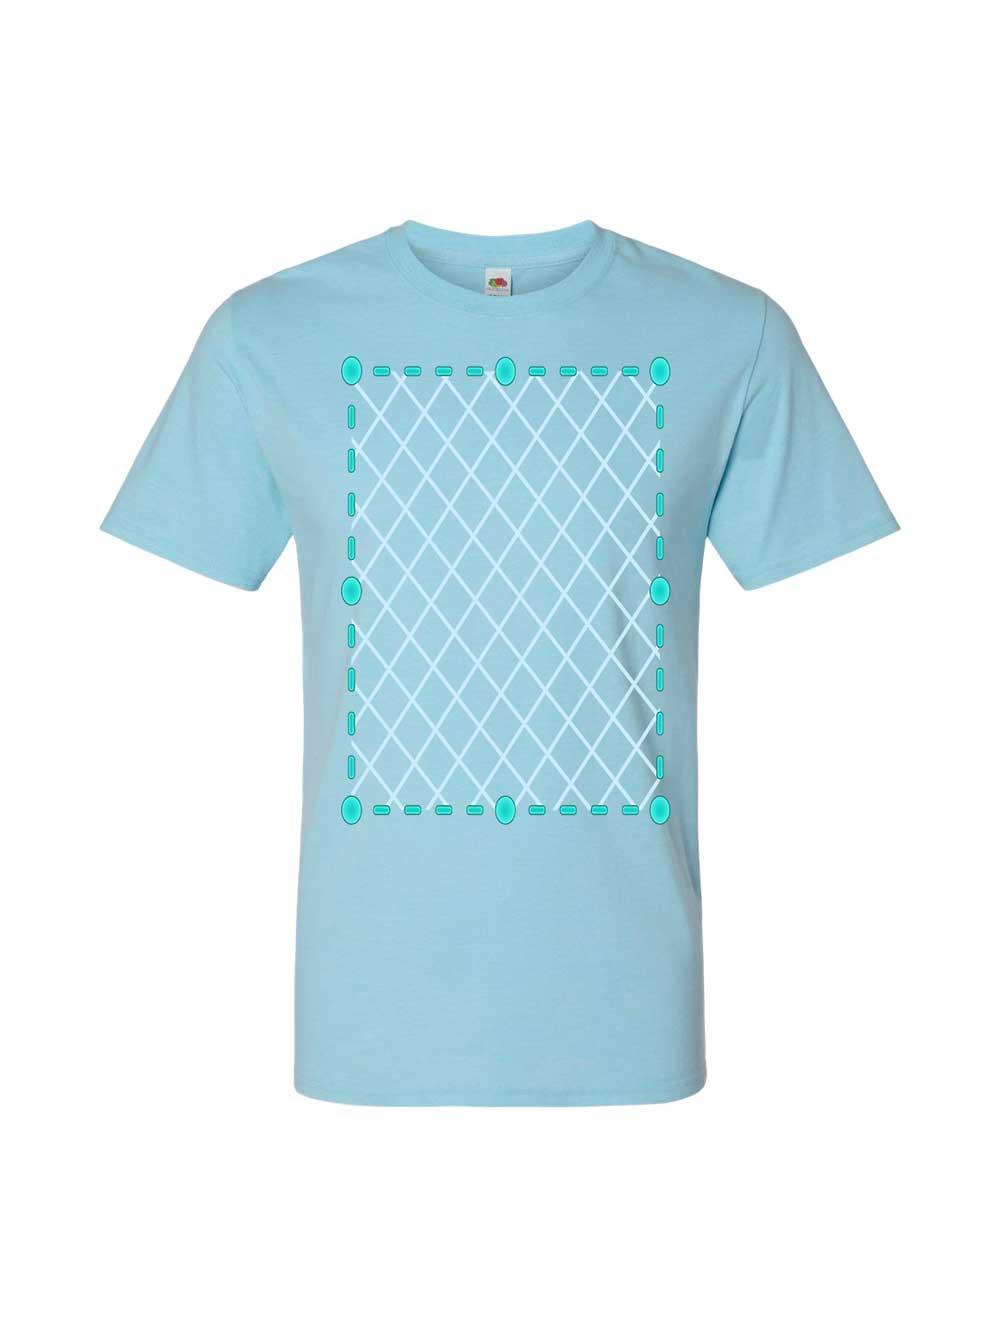 Fruit of the Loom Supercotton Unisex T-Shirt - Constantly Create Shop